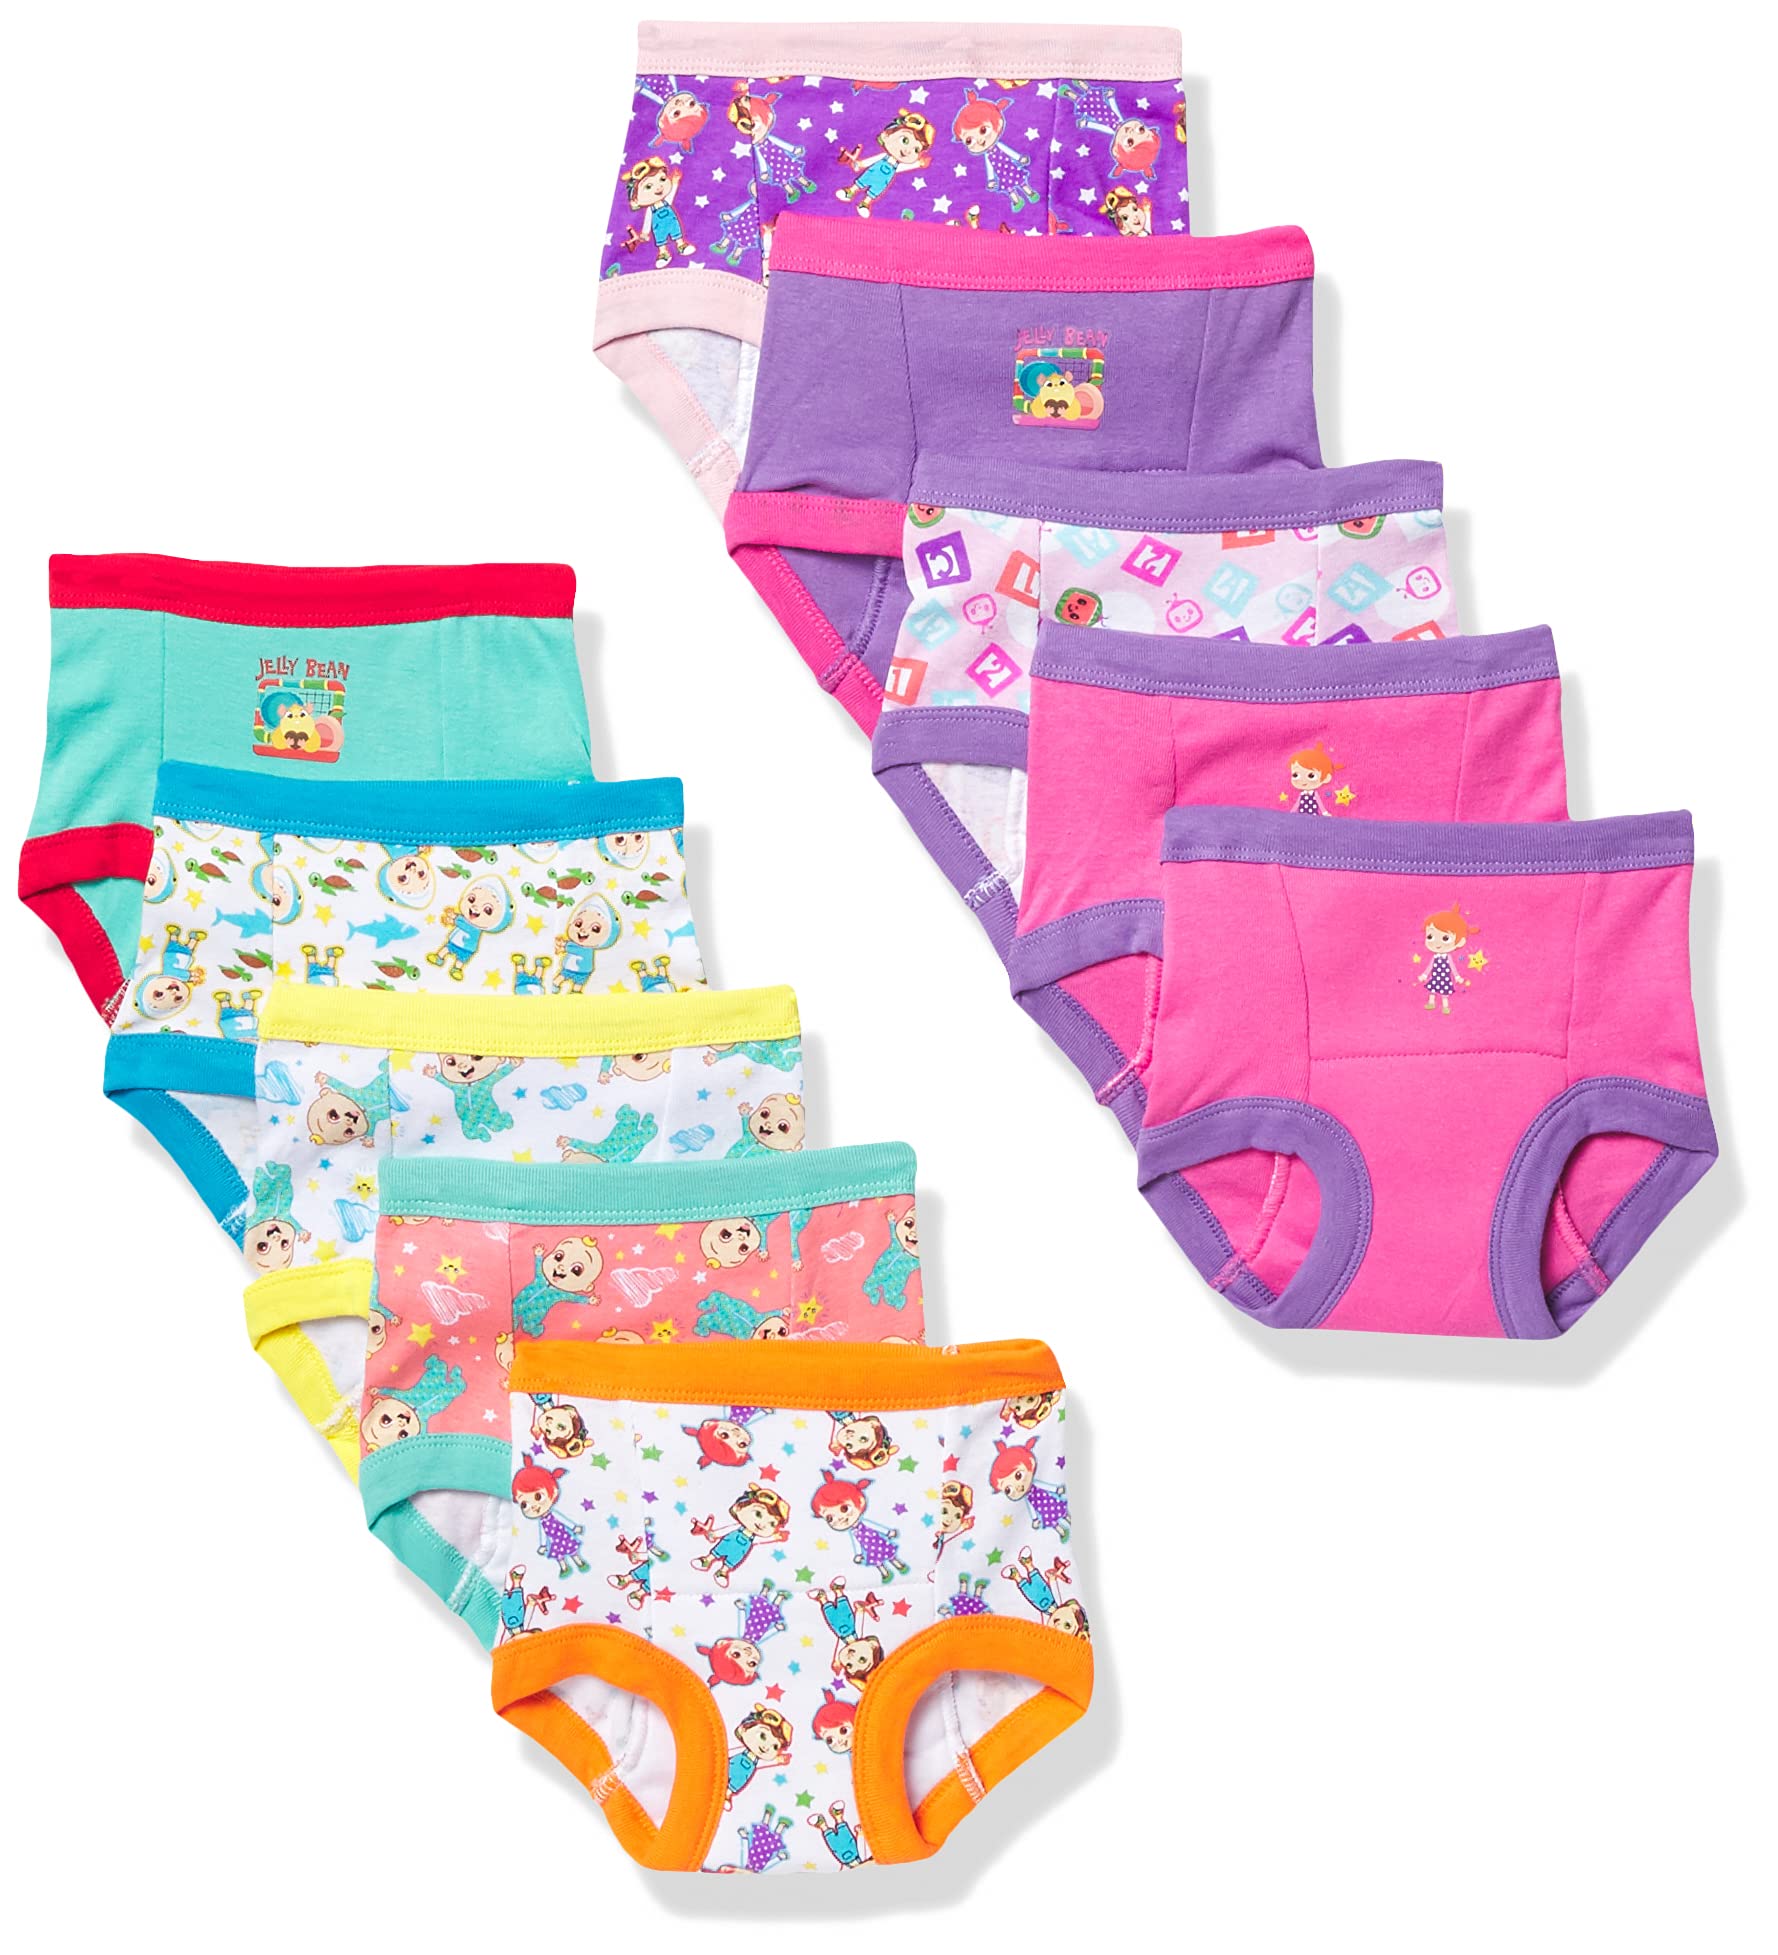 Coco Melon Baby Potty Training Pants Multipack 2T Cocomelong10pk